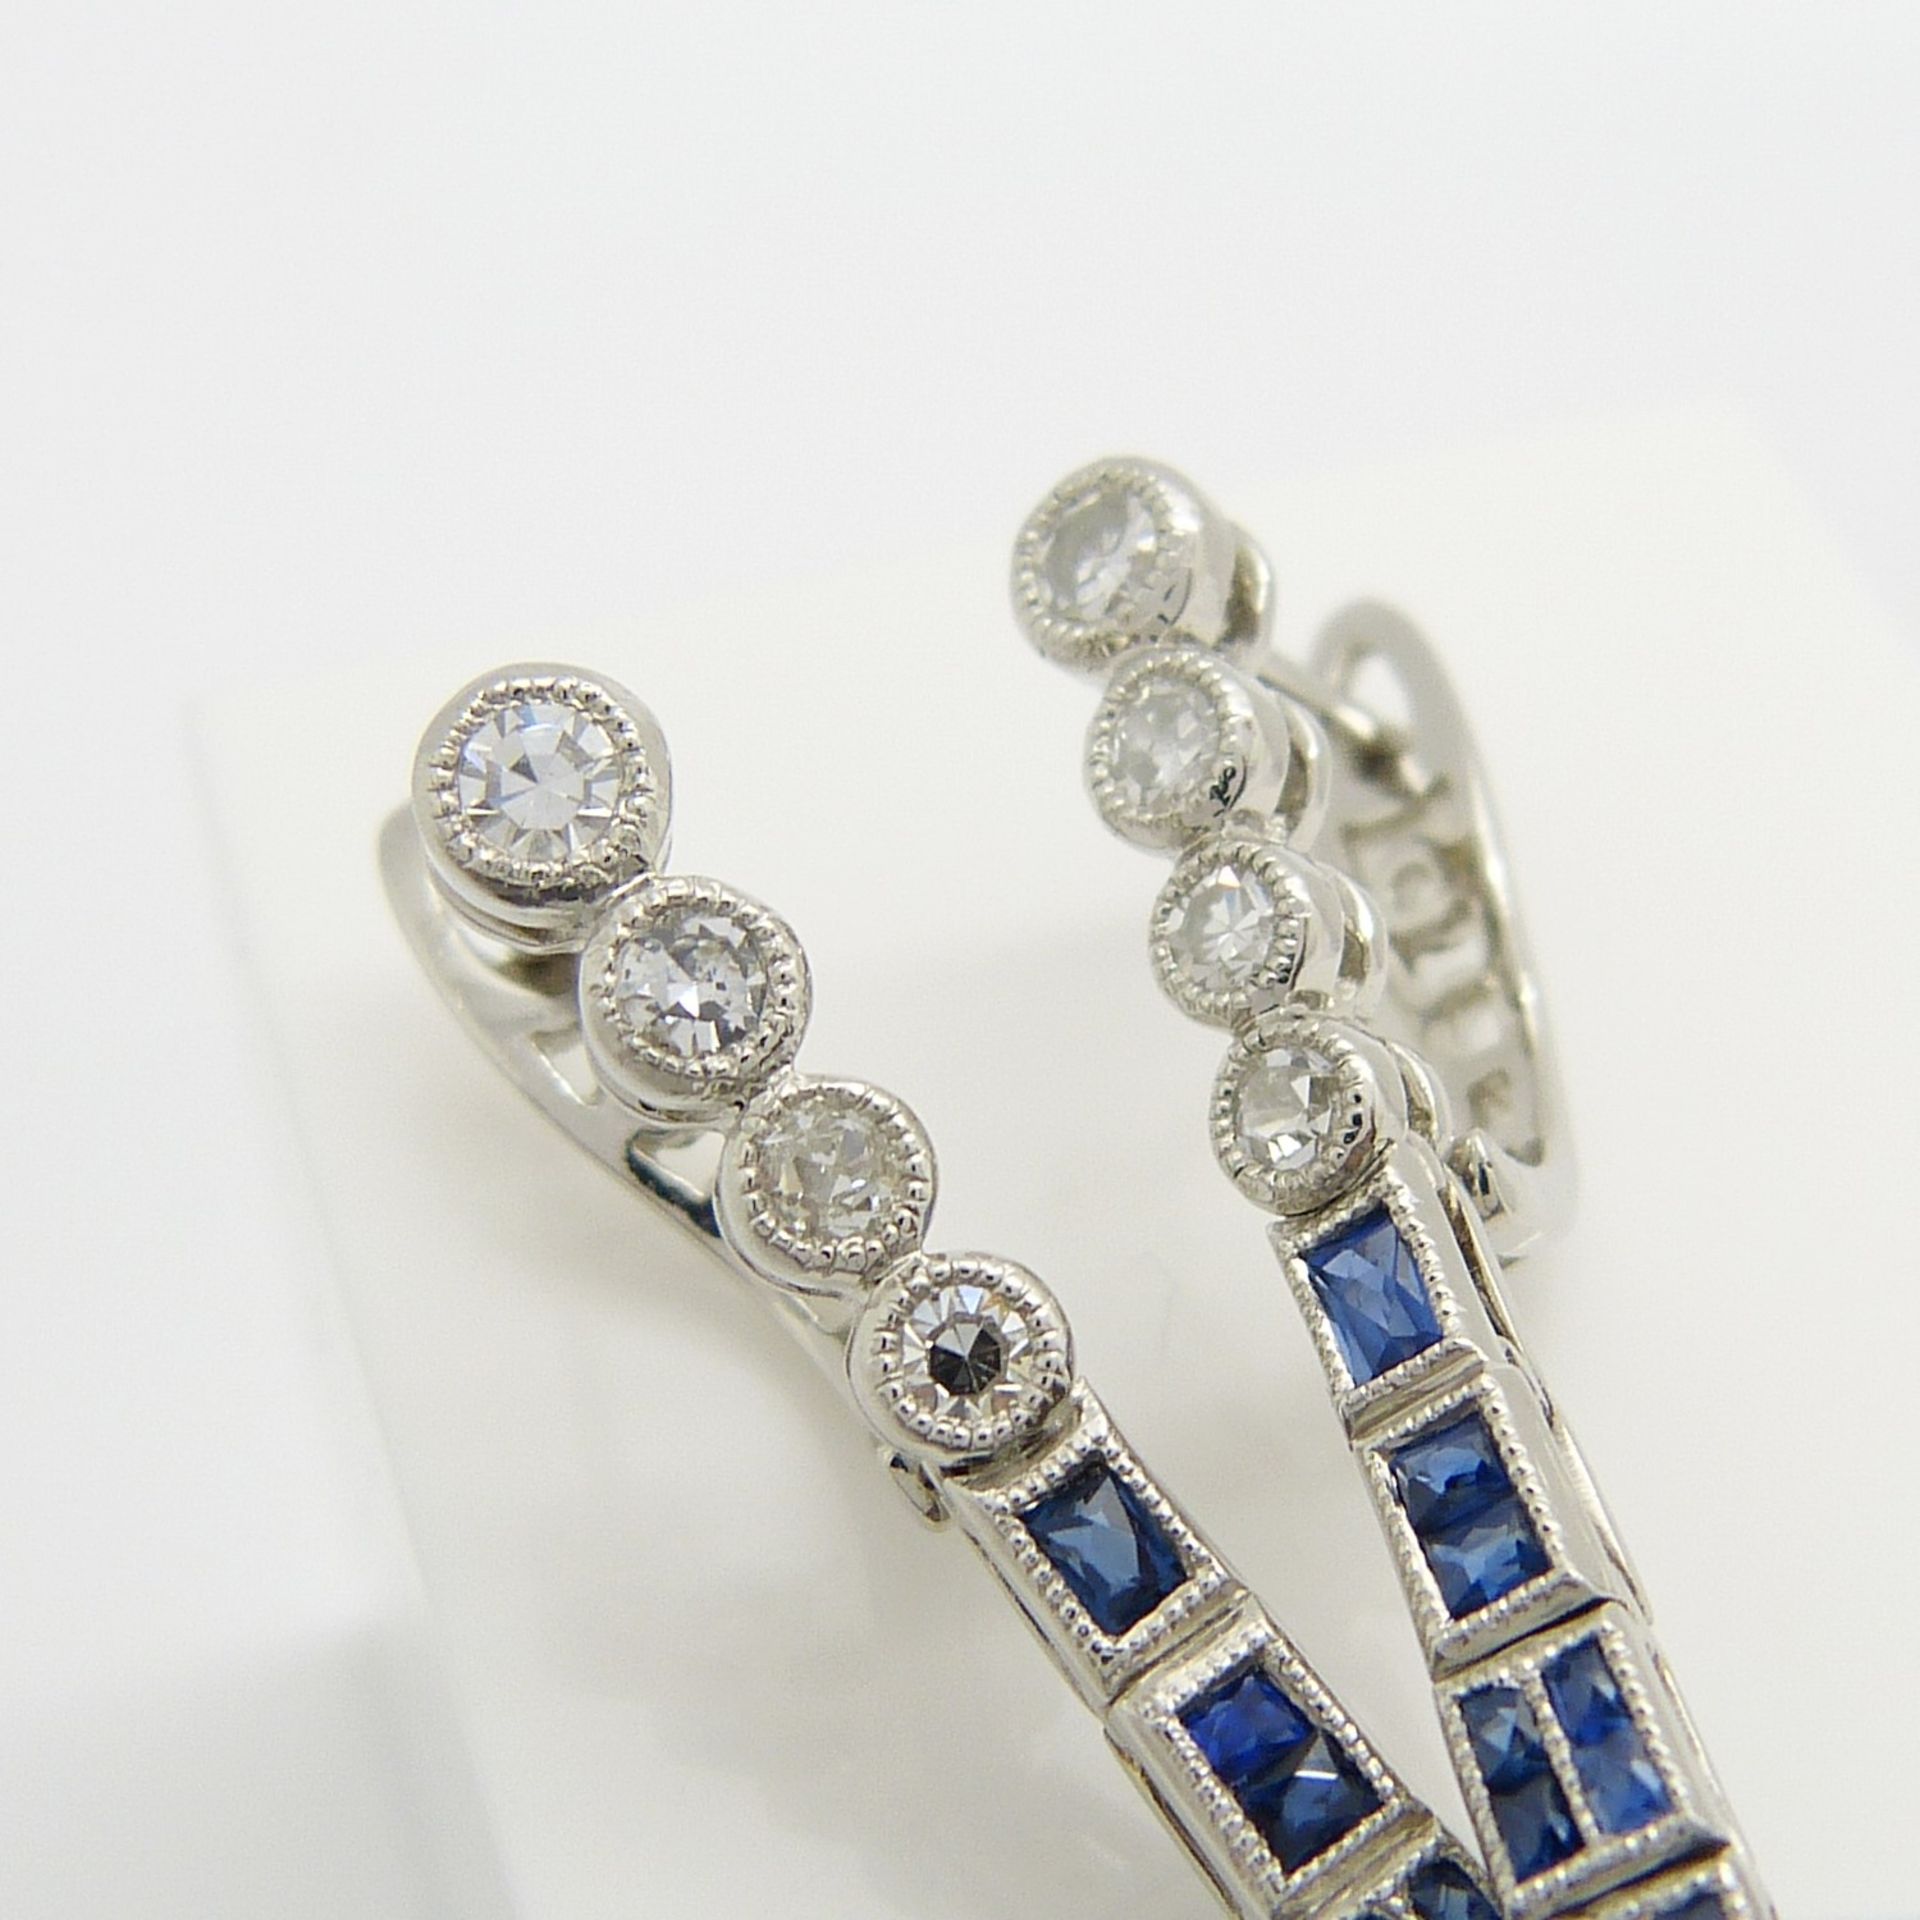 An outstanding pair of vintage-style long drop earrings set with diamonds and sapphires, boxed - Image 8 of 8